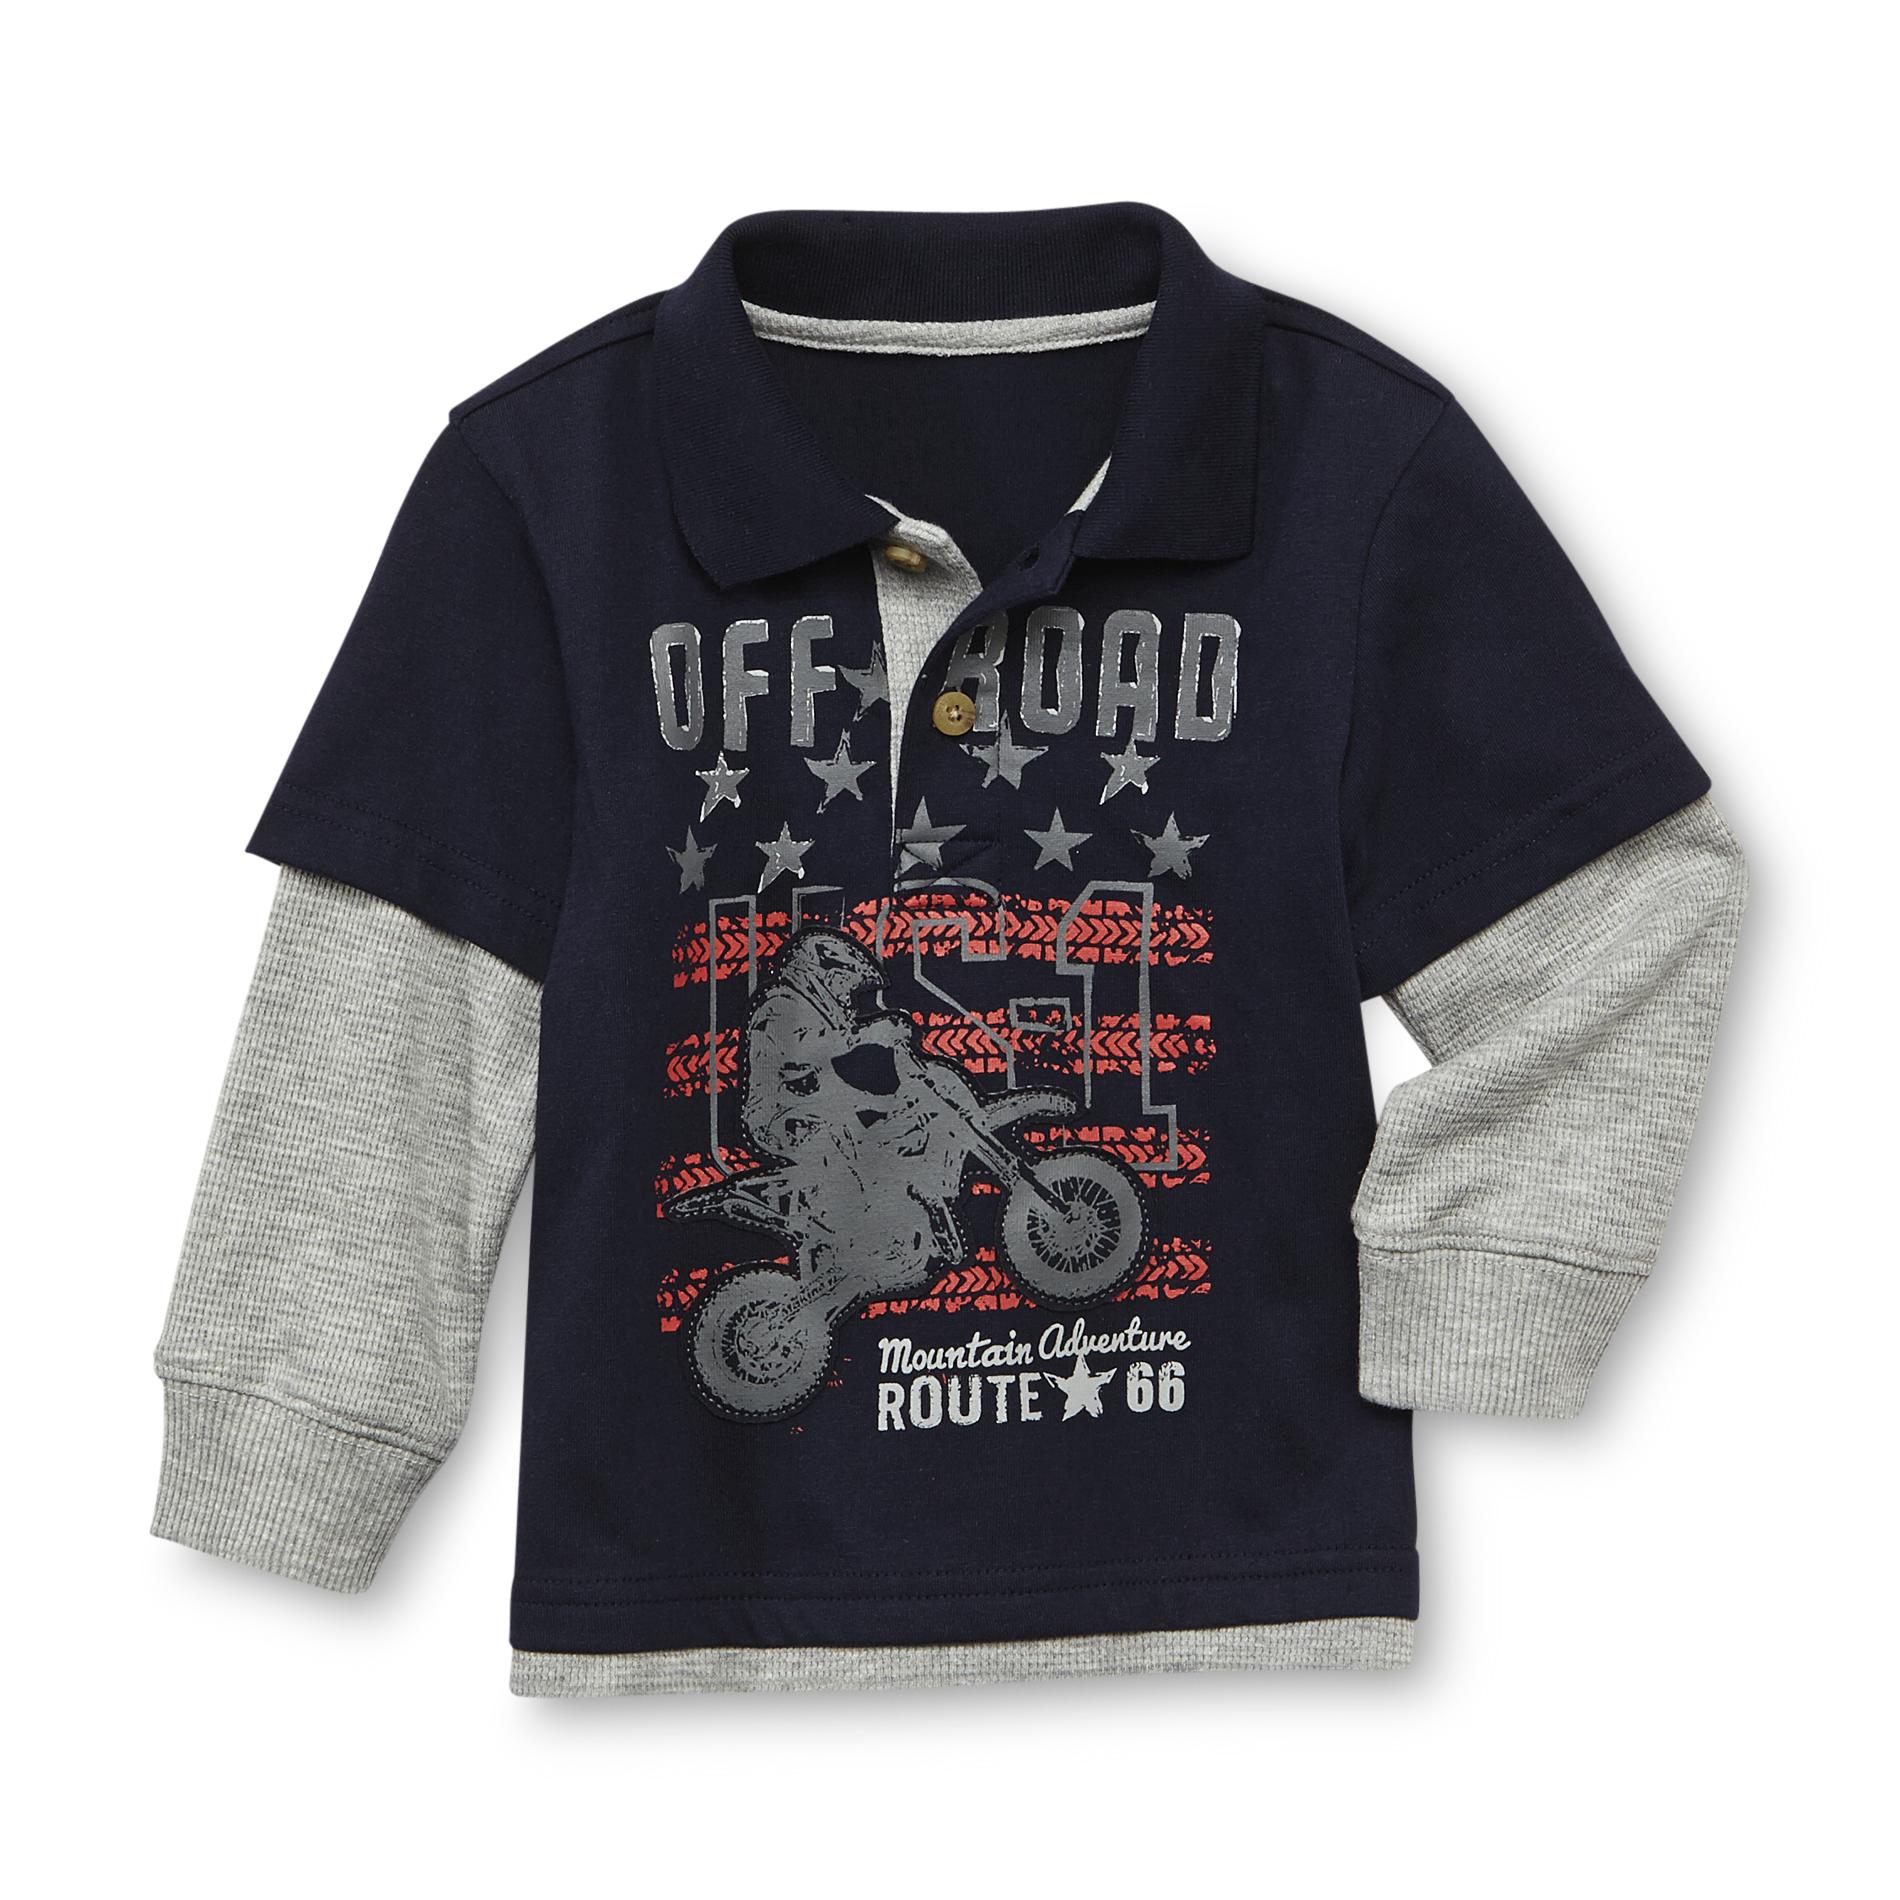 Route 66 Baby Infant & Toddler Boy's Layered-Look Polo Shirt - Motorcycle